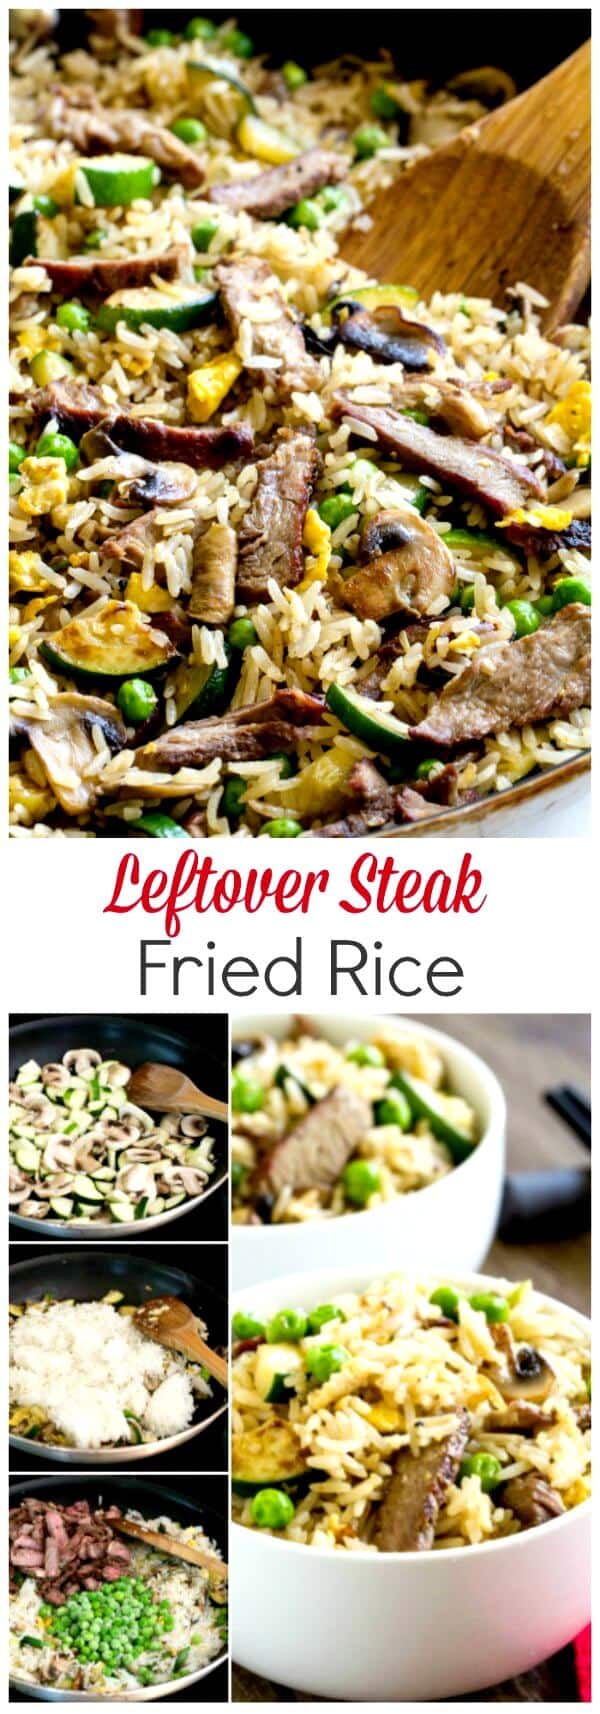 This steak fried rice is a delicious way to use leftover steak and rice for a new and exciting meal. Leftovers never tasted this good!